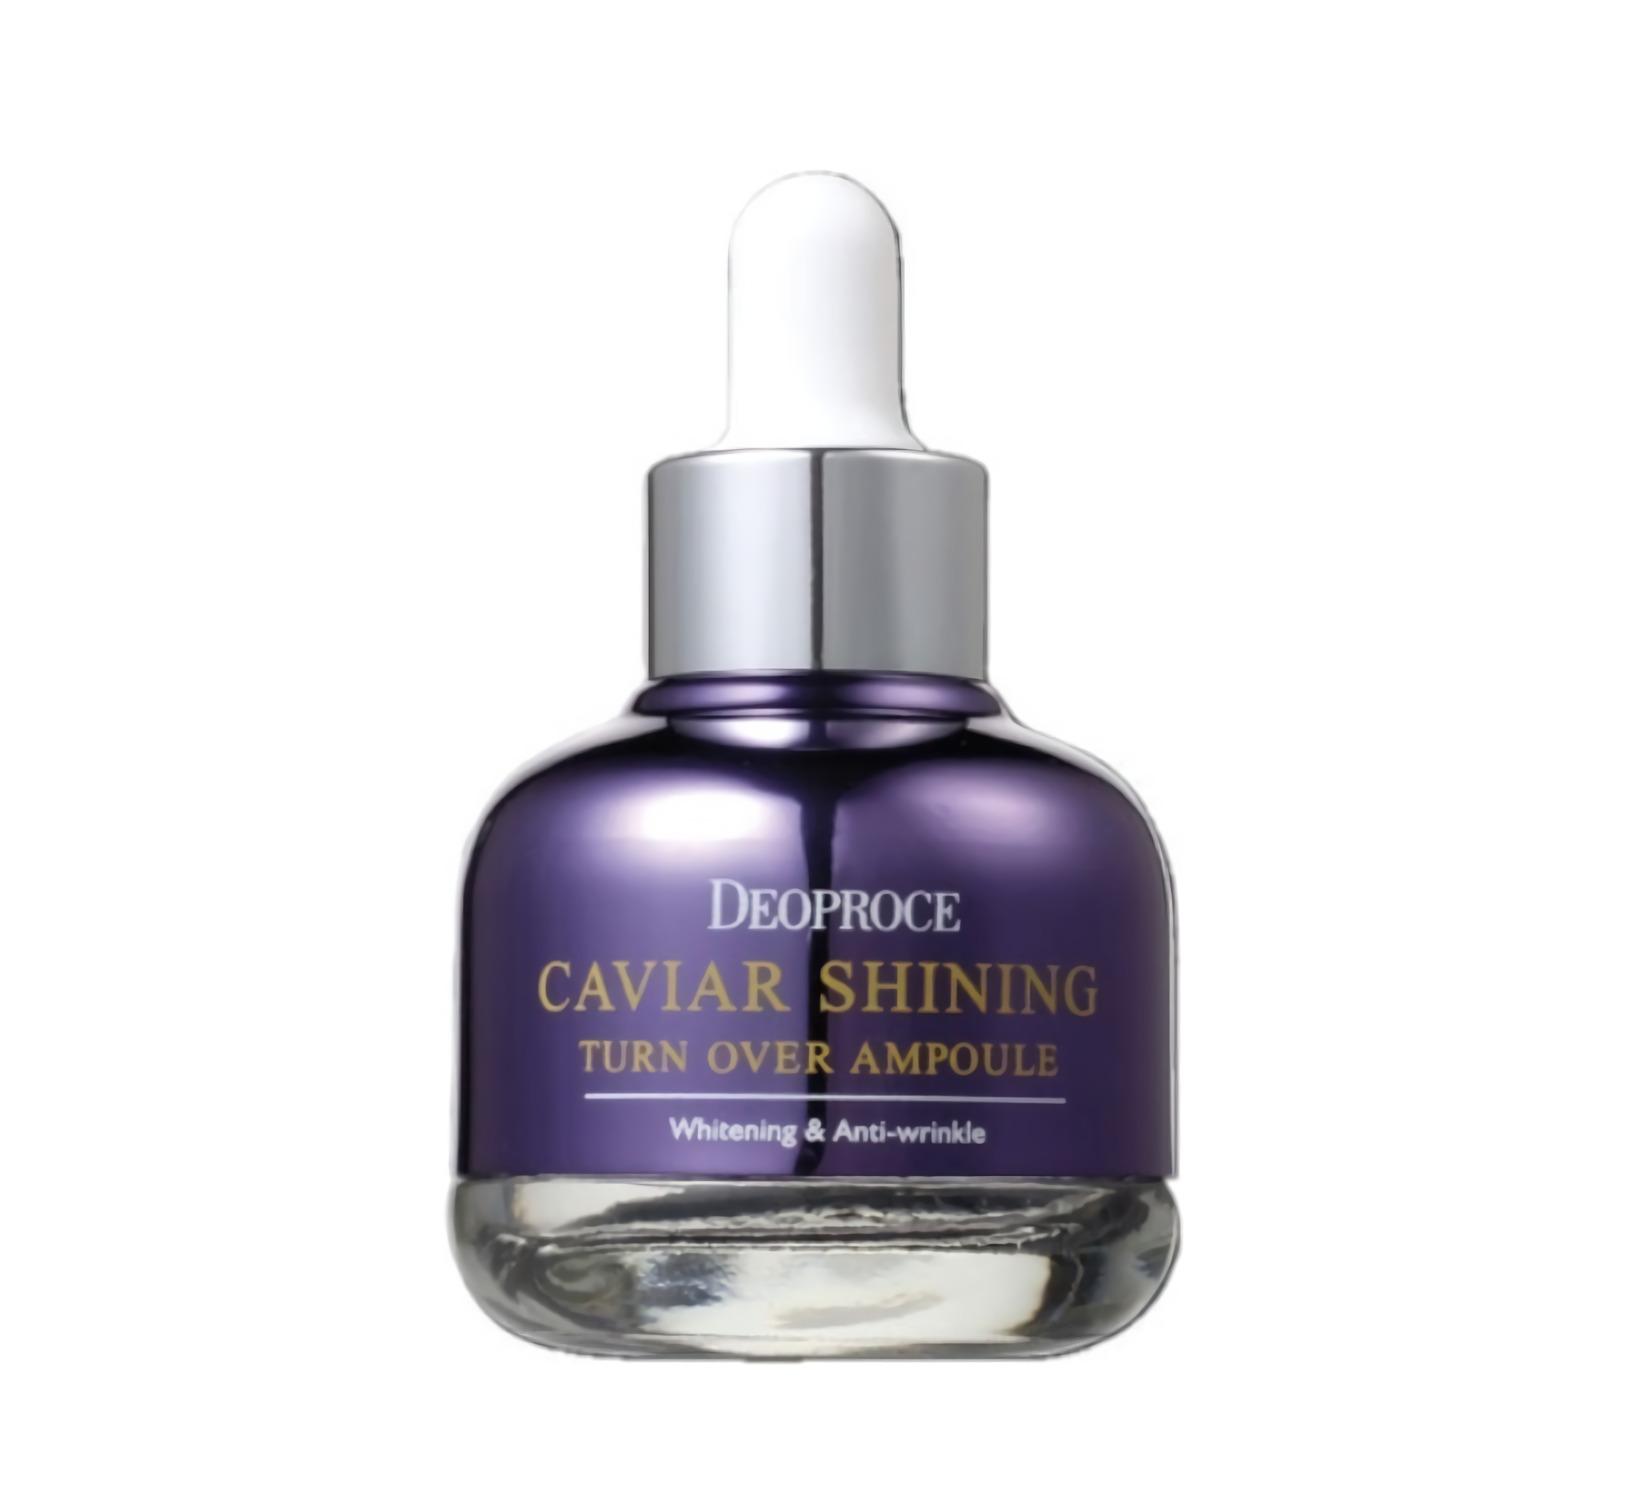 Ampoule Deoproce Caviar Shining Turn Over